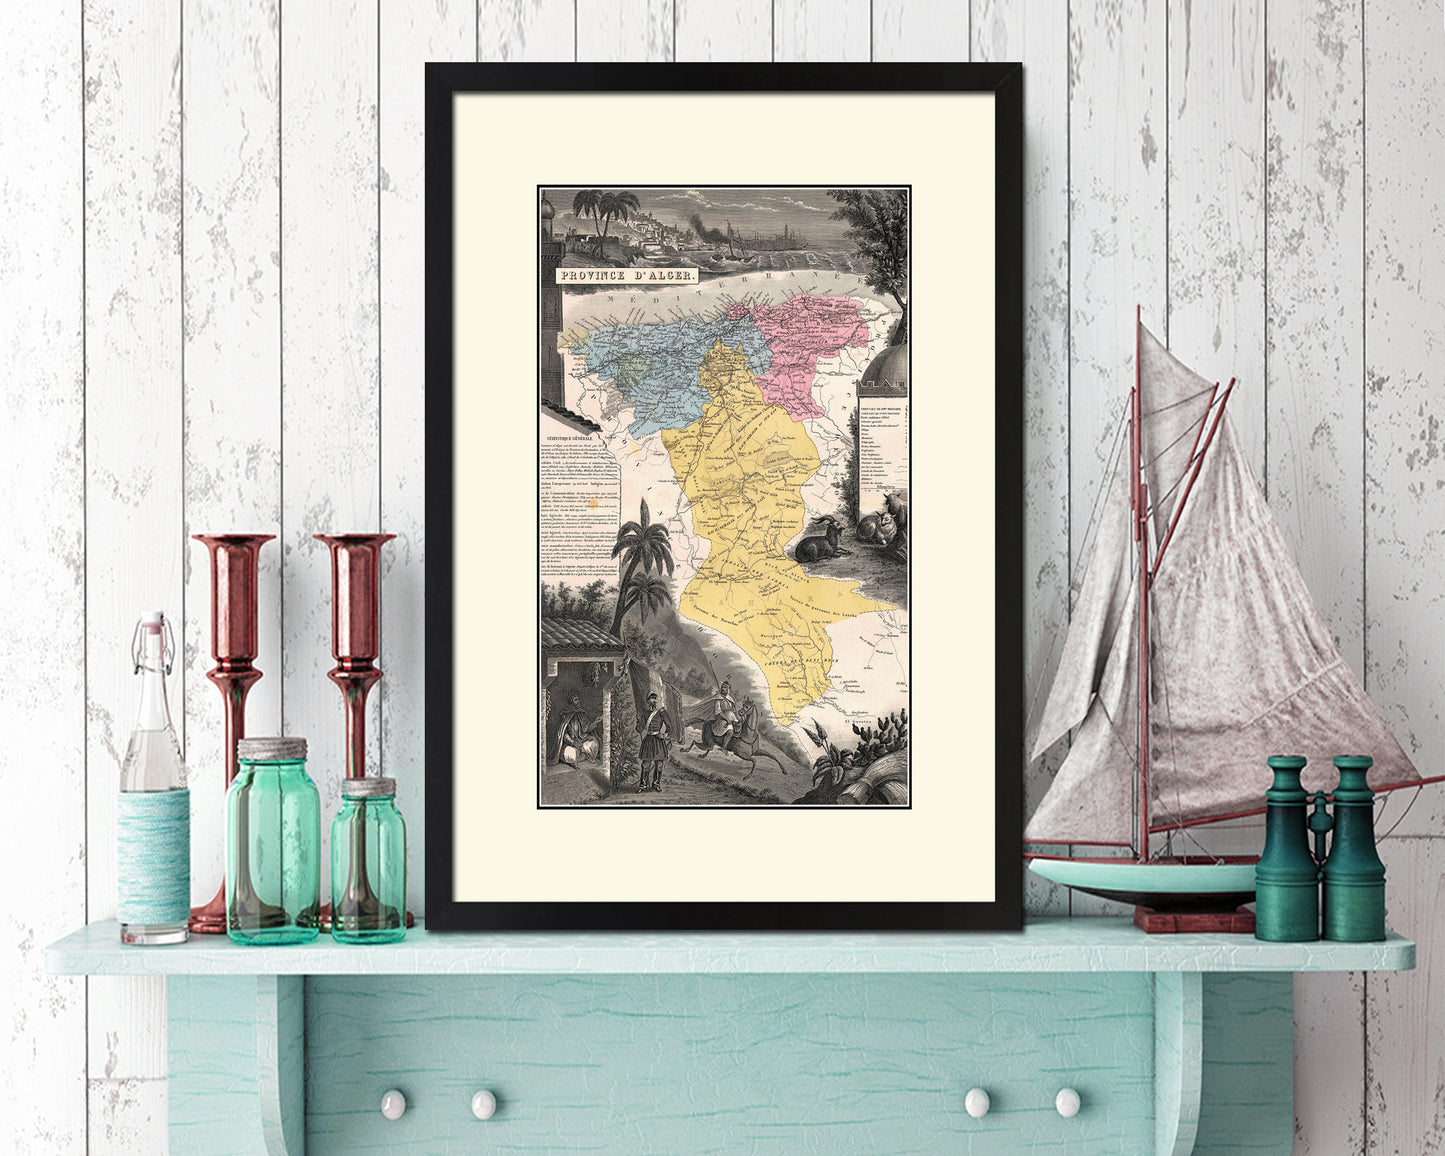 Province D'alcer Old Map Wood Framed Print Art Wall Decor Gifts